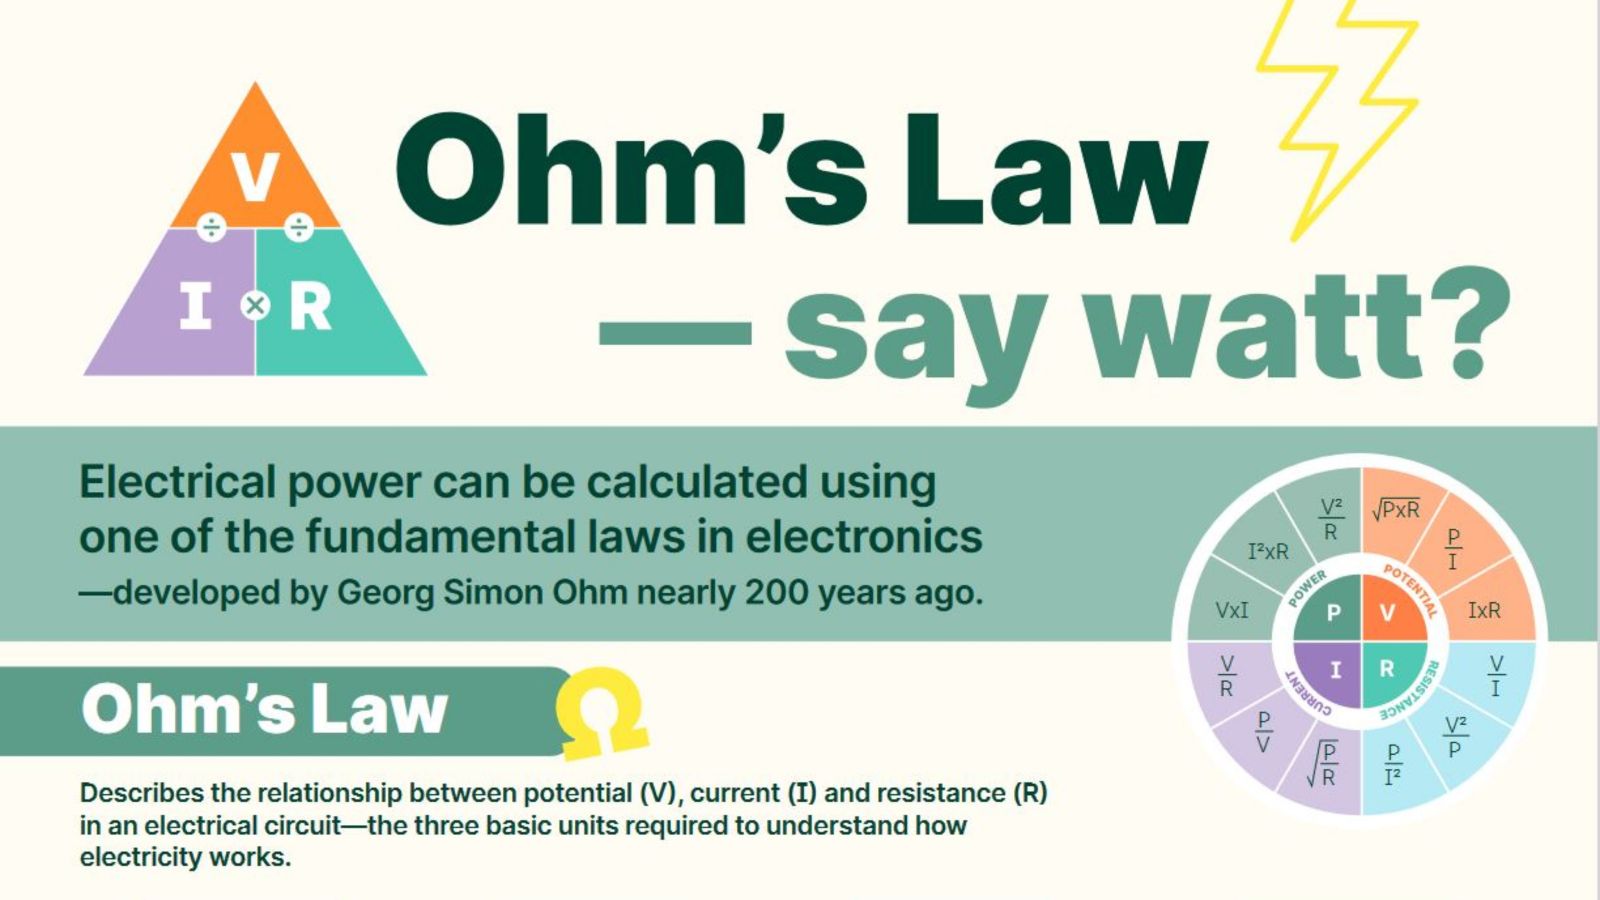 A PDF poster about Ohm's Law